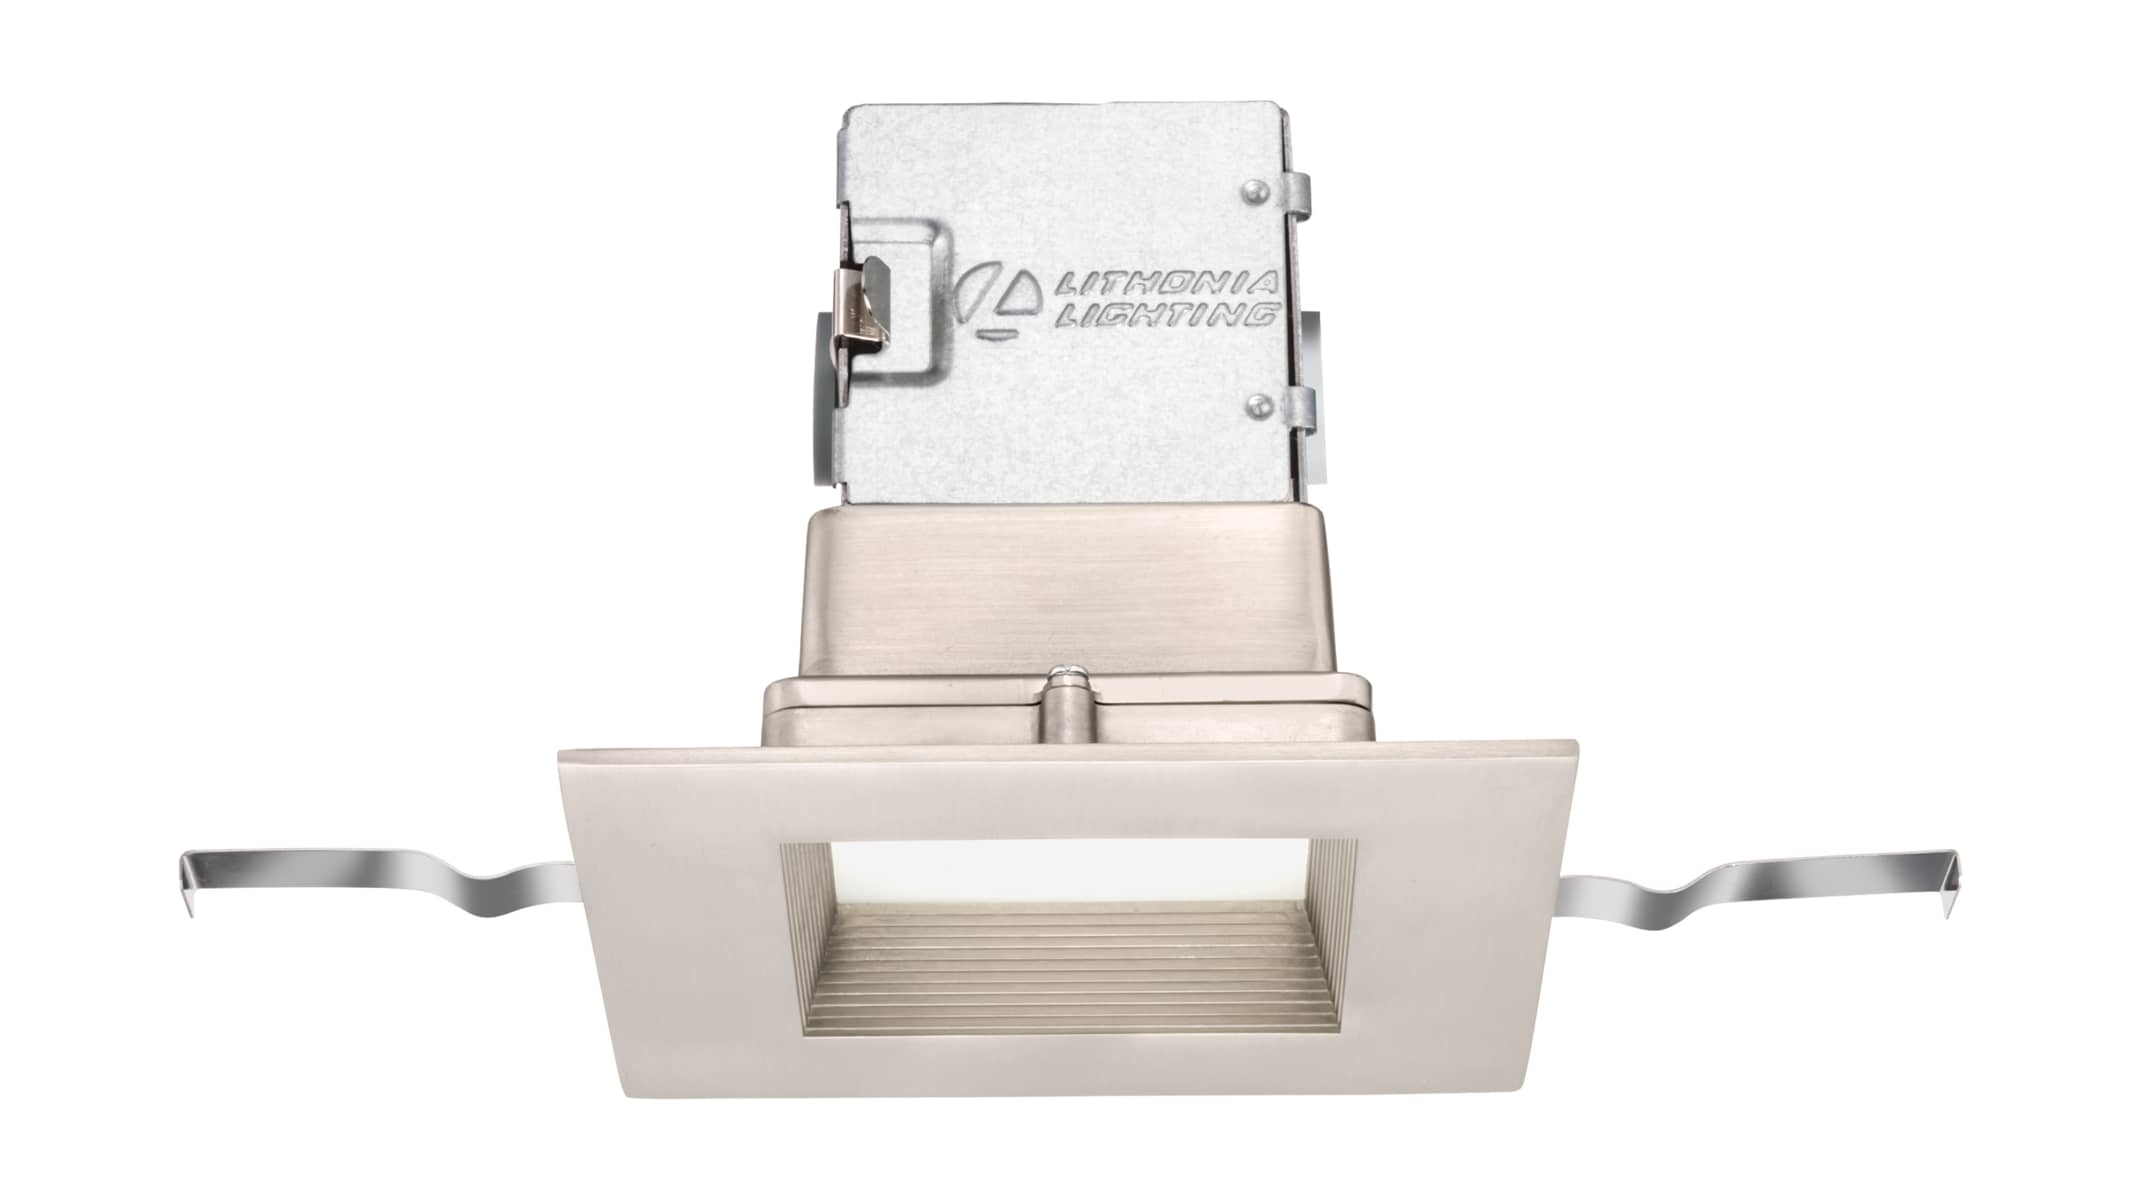 Lithonia Lighting OneUp Square 4 in Brushed Nickel Integrated LED Recessed Kit 